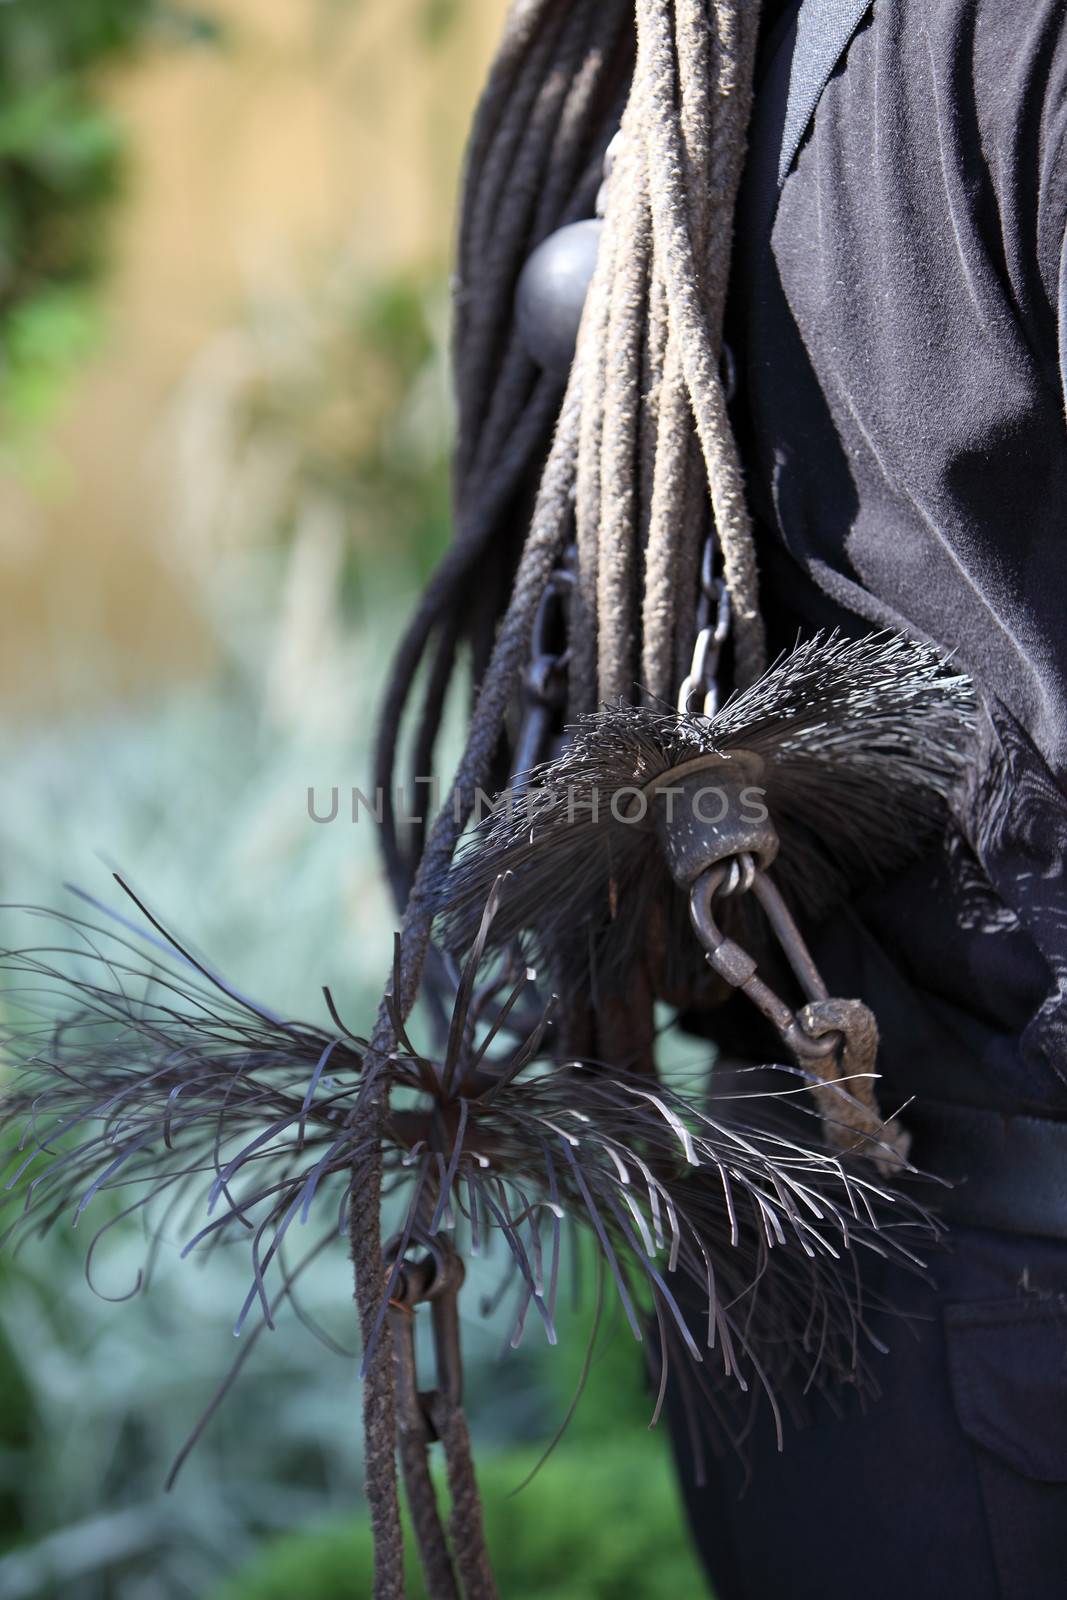 Coarse wire brushes and euipment of a chimney sweep slung over the back of a workman, close up view